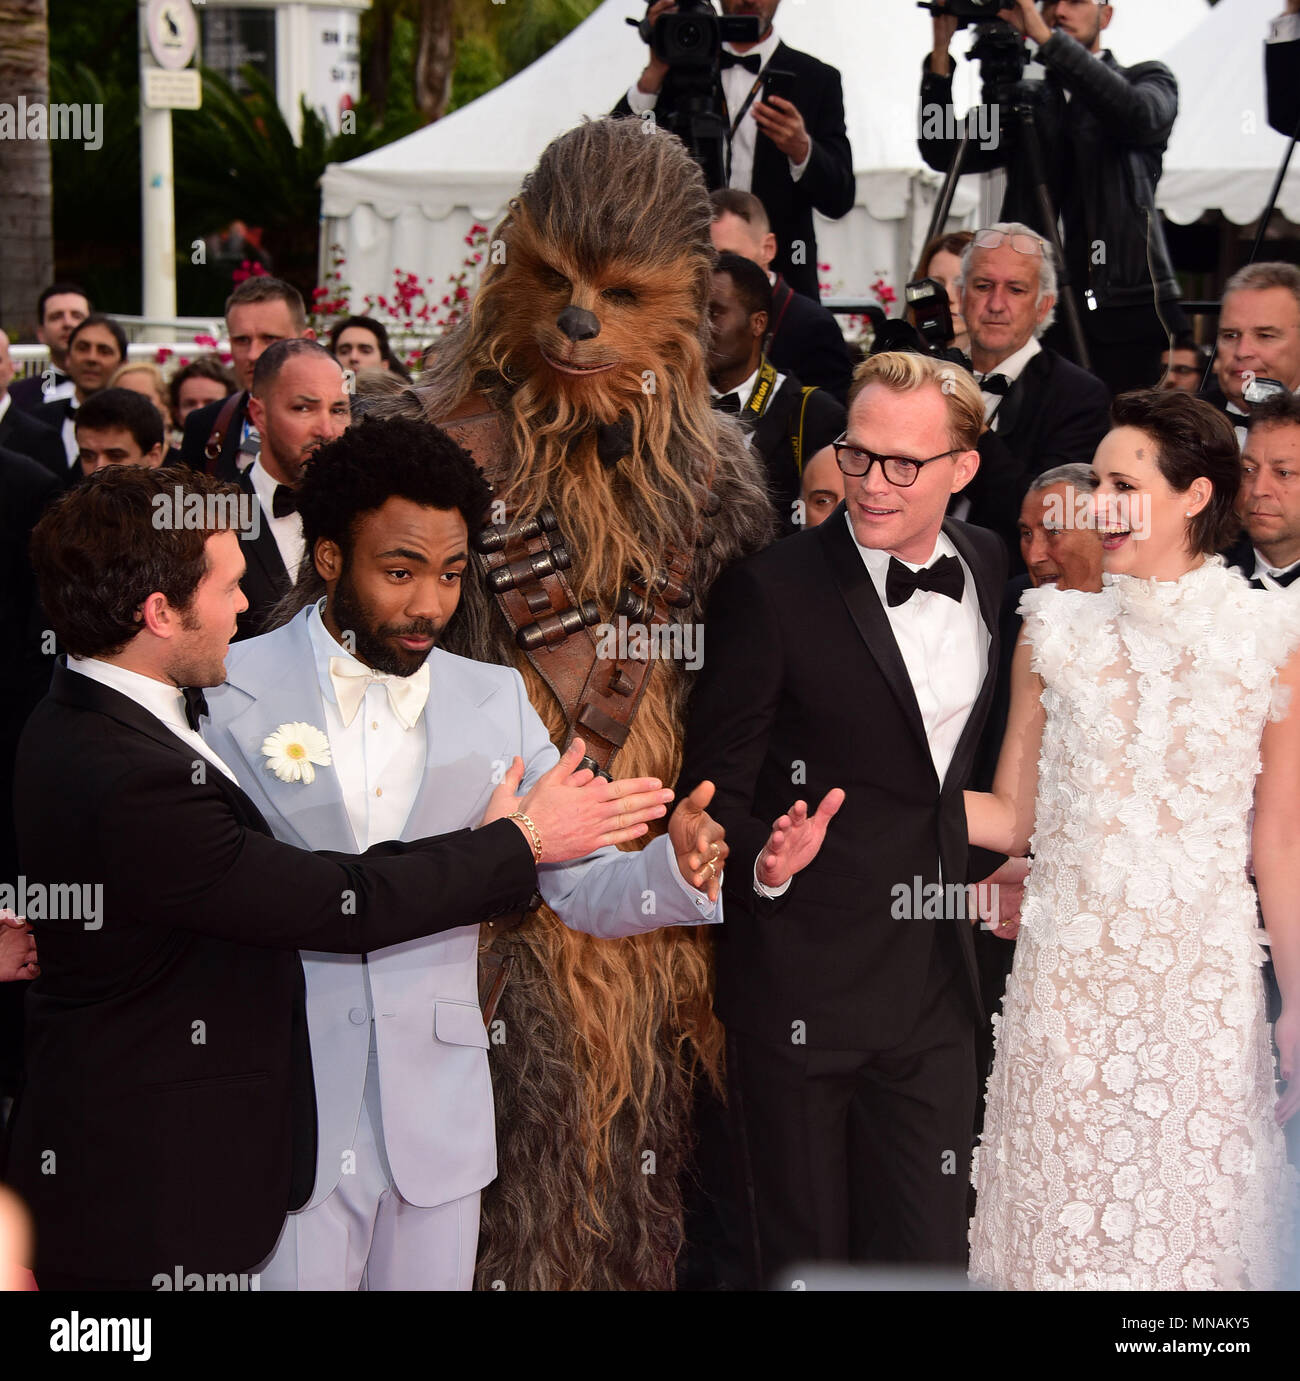 Cannes, France. 15th May 2018. STAR WARS   attendingThe RED CARPIT for STAR WARS STORY  at Cannes Film Festival15th May 2018 Credit: Peter Phillips/Alamy Live News Stock Photo